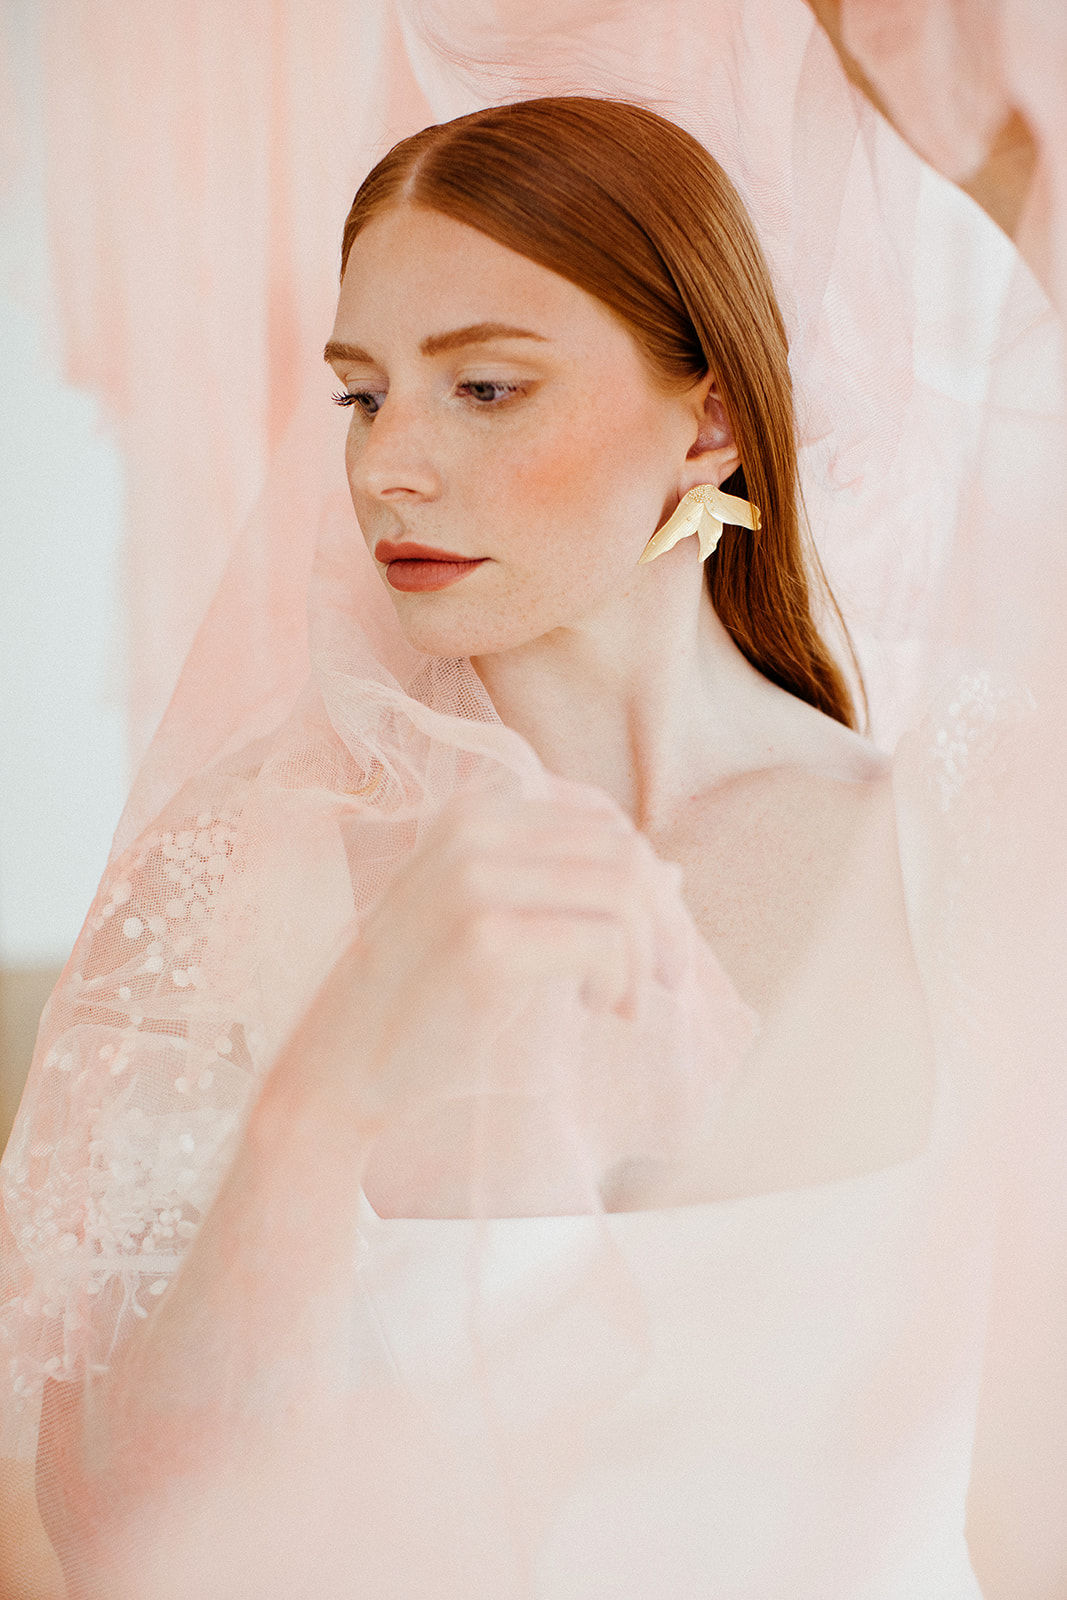 Red head bridal portrait with light pink fabric as a backdrop